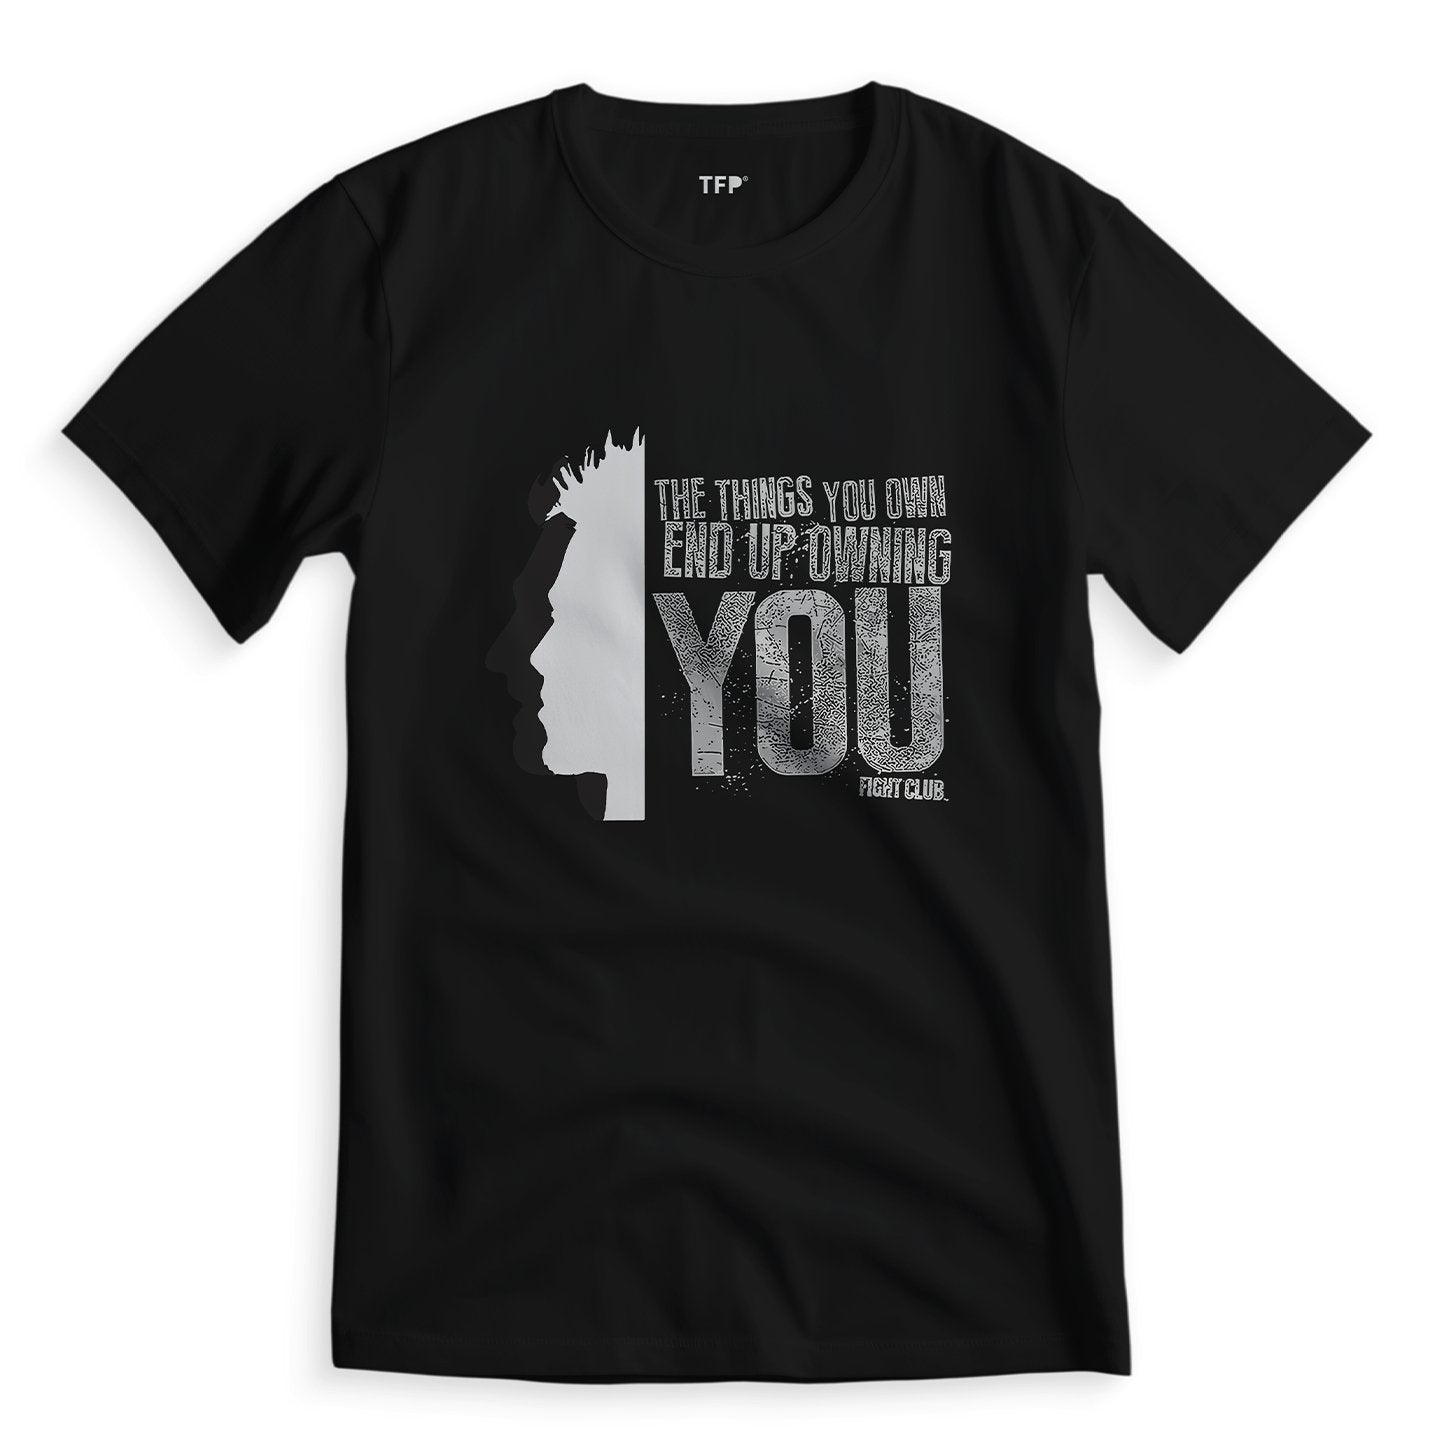 The Things You Own End Up Owning You - T-Shirt